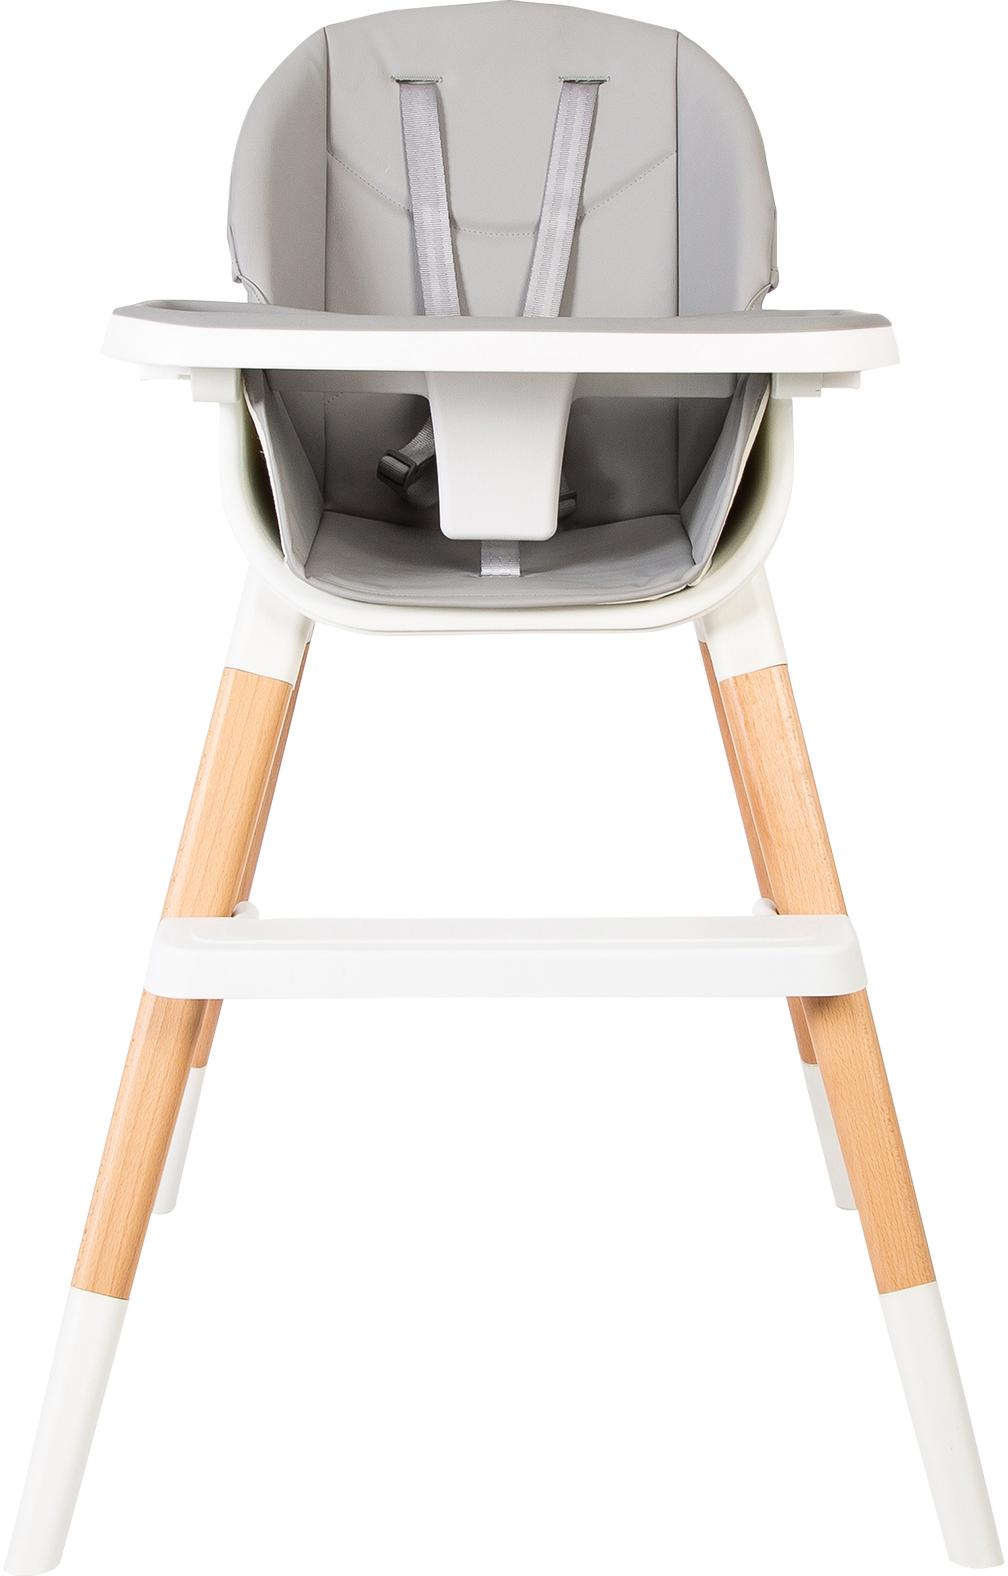 Red Kite Feed Me Combi 4 In 1 Highchair